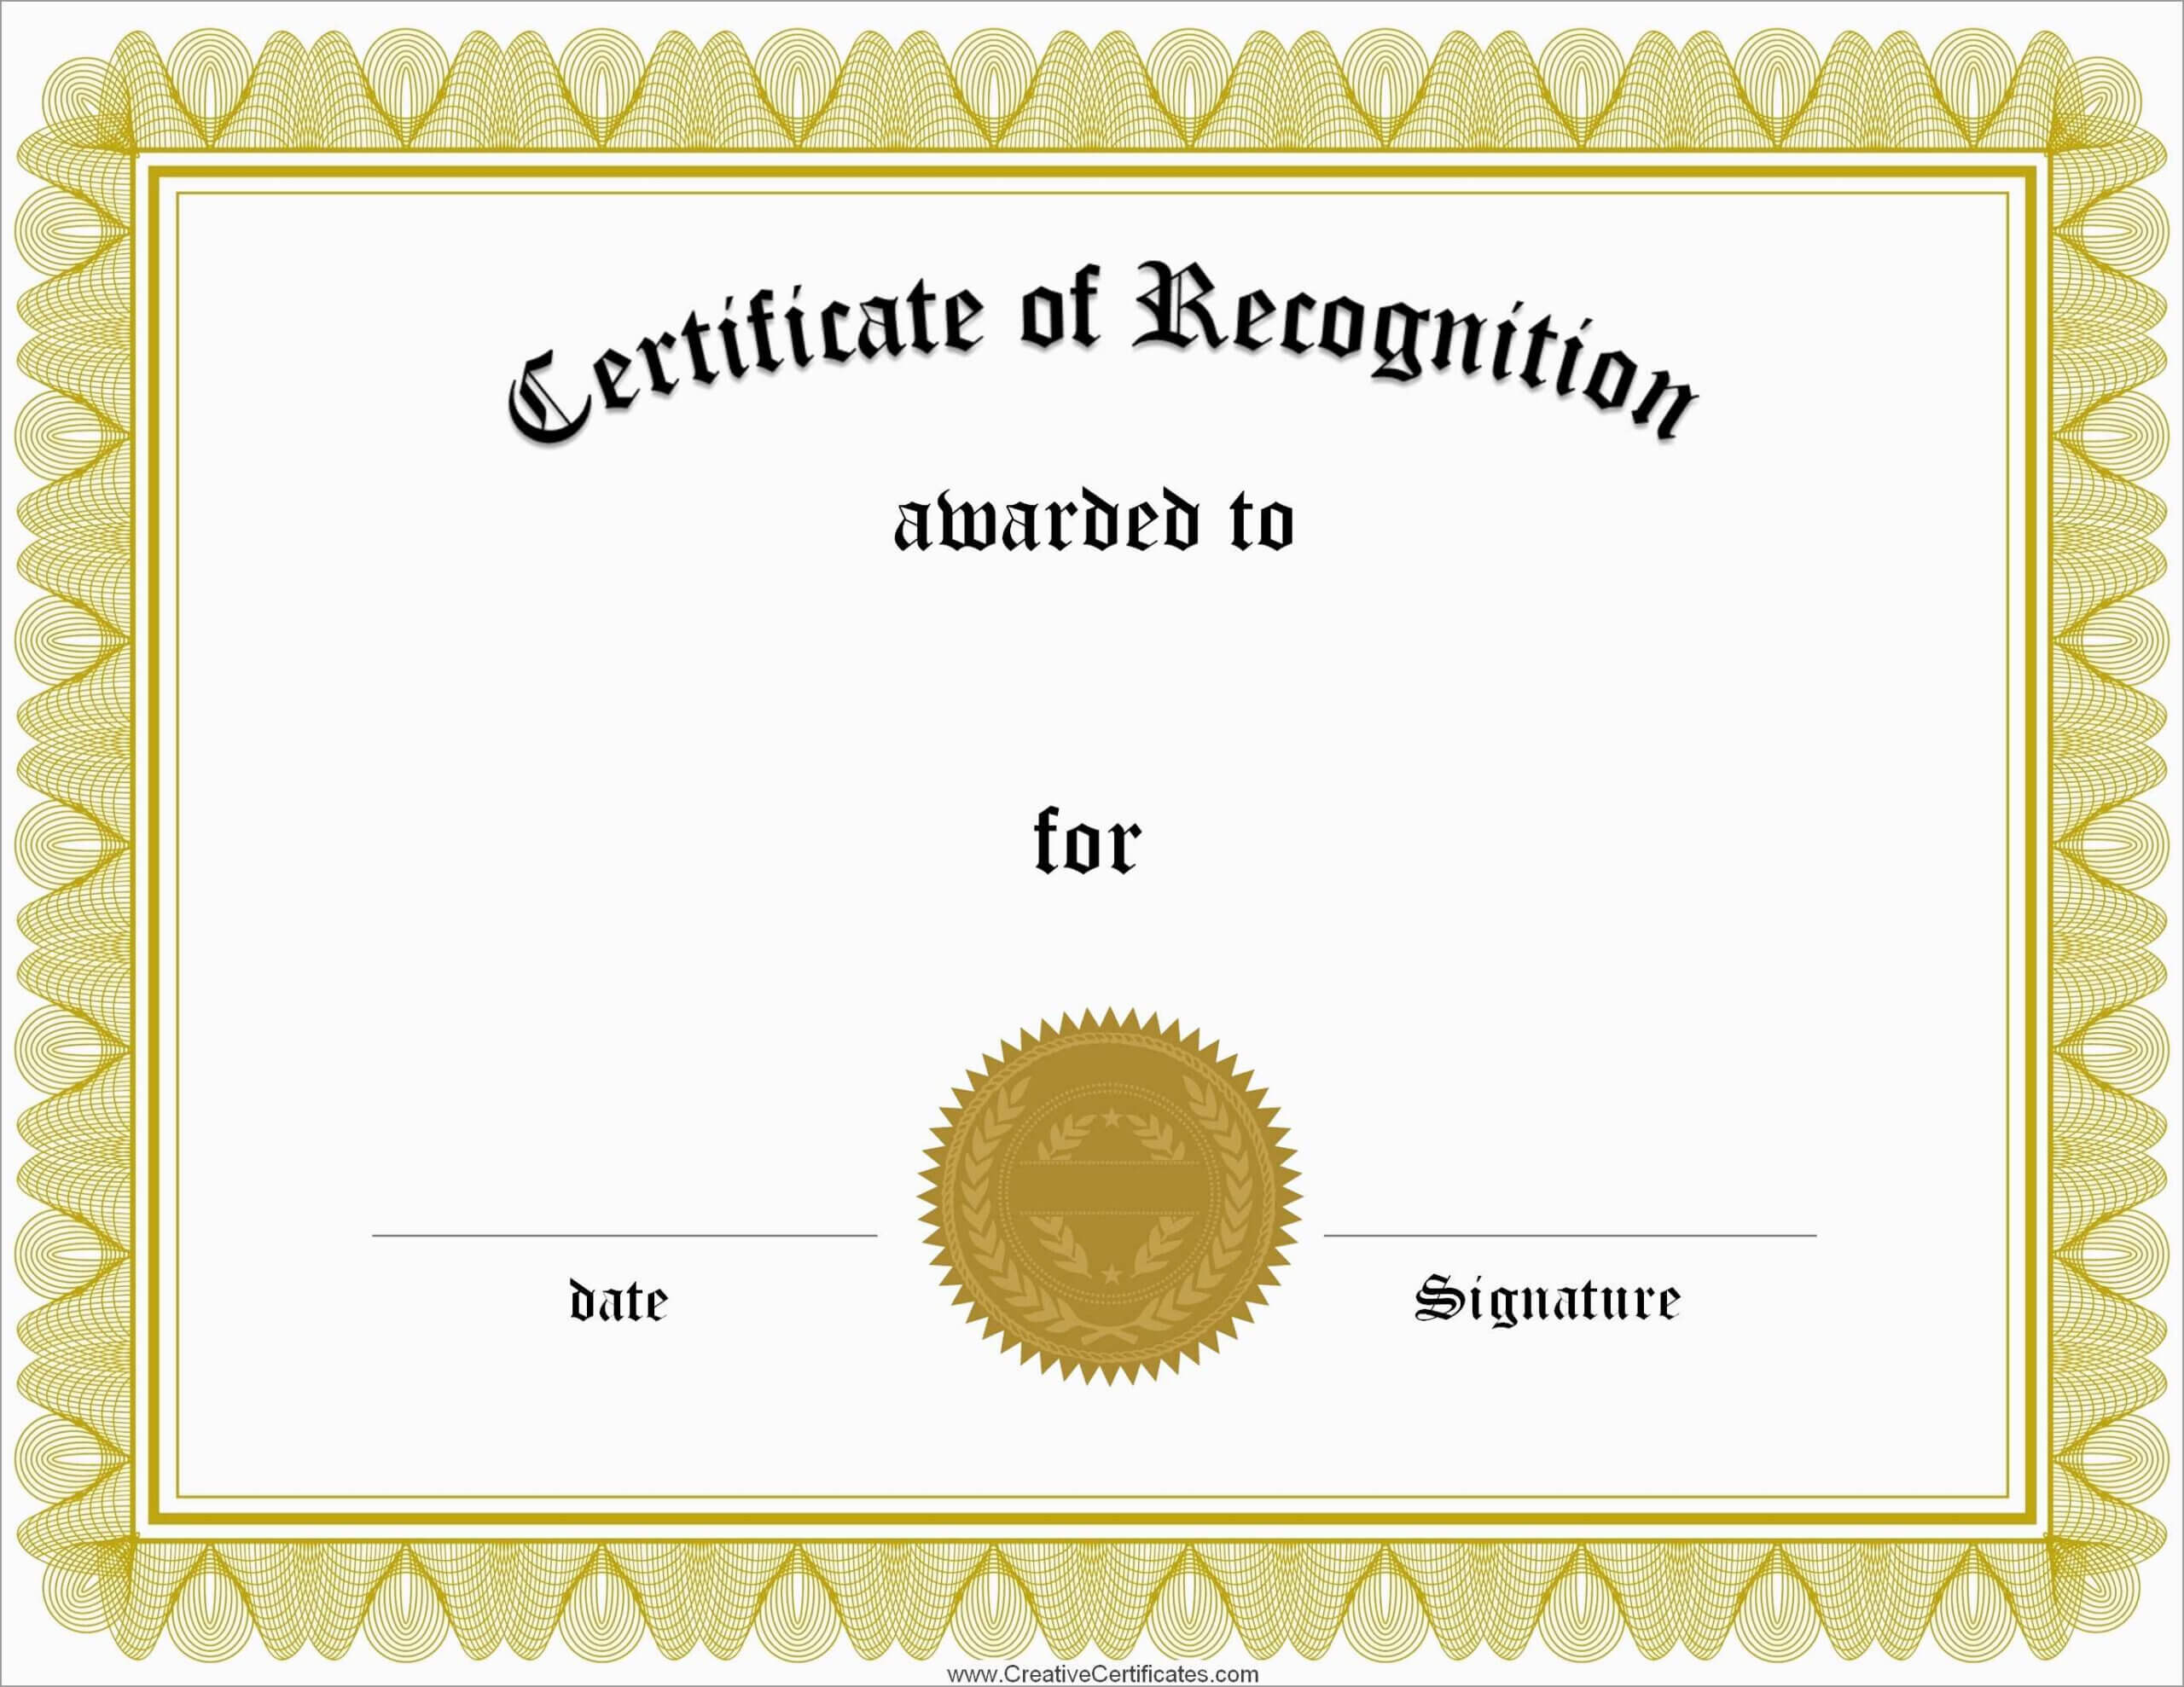 025 Template Ideas Certificate Of Recognition Word Award Pertaining To Certificate Of Recognition Word Template